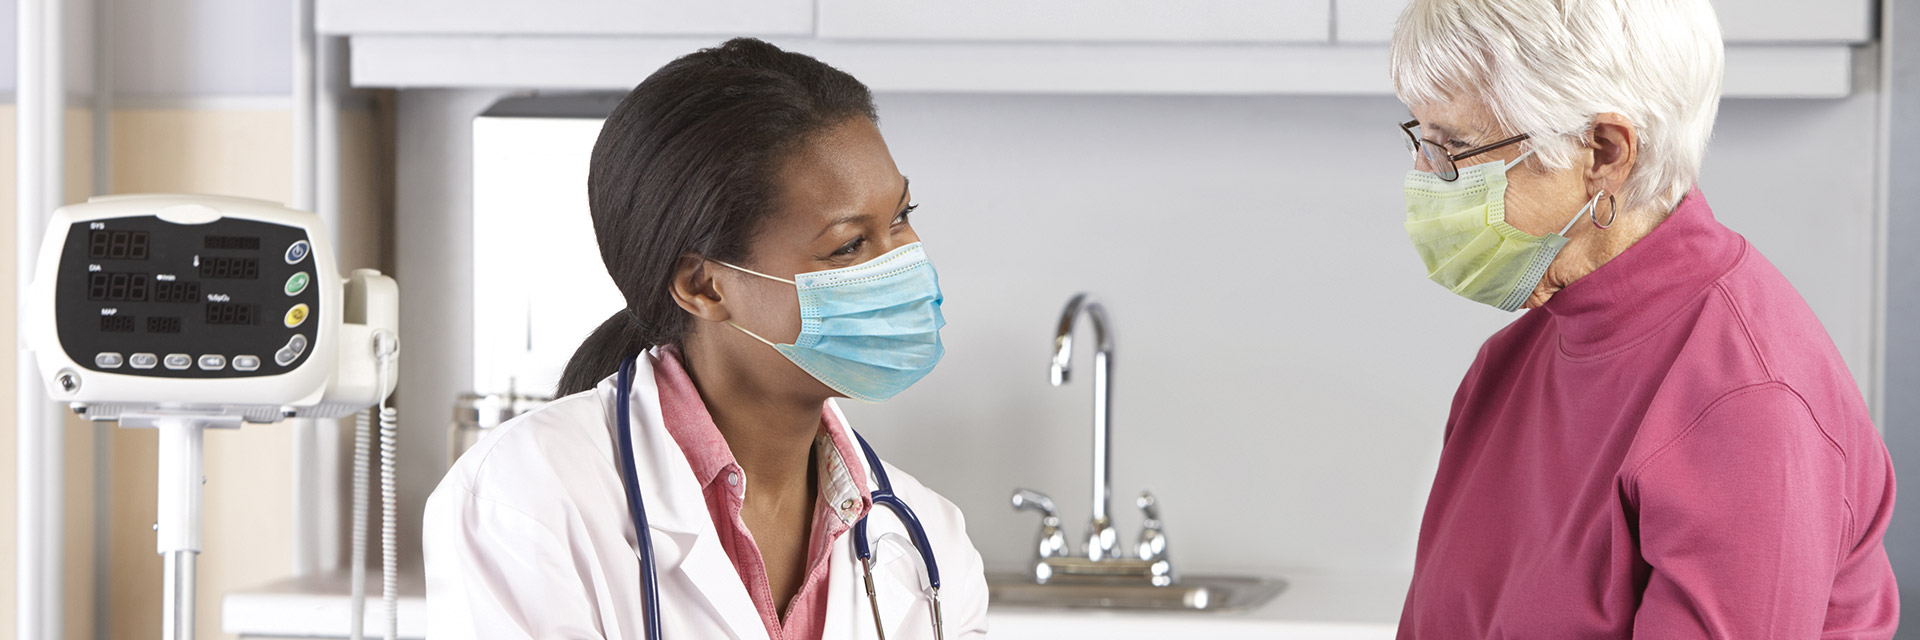 Masked female patient talking to provider